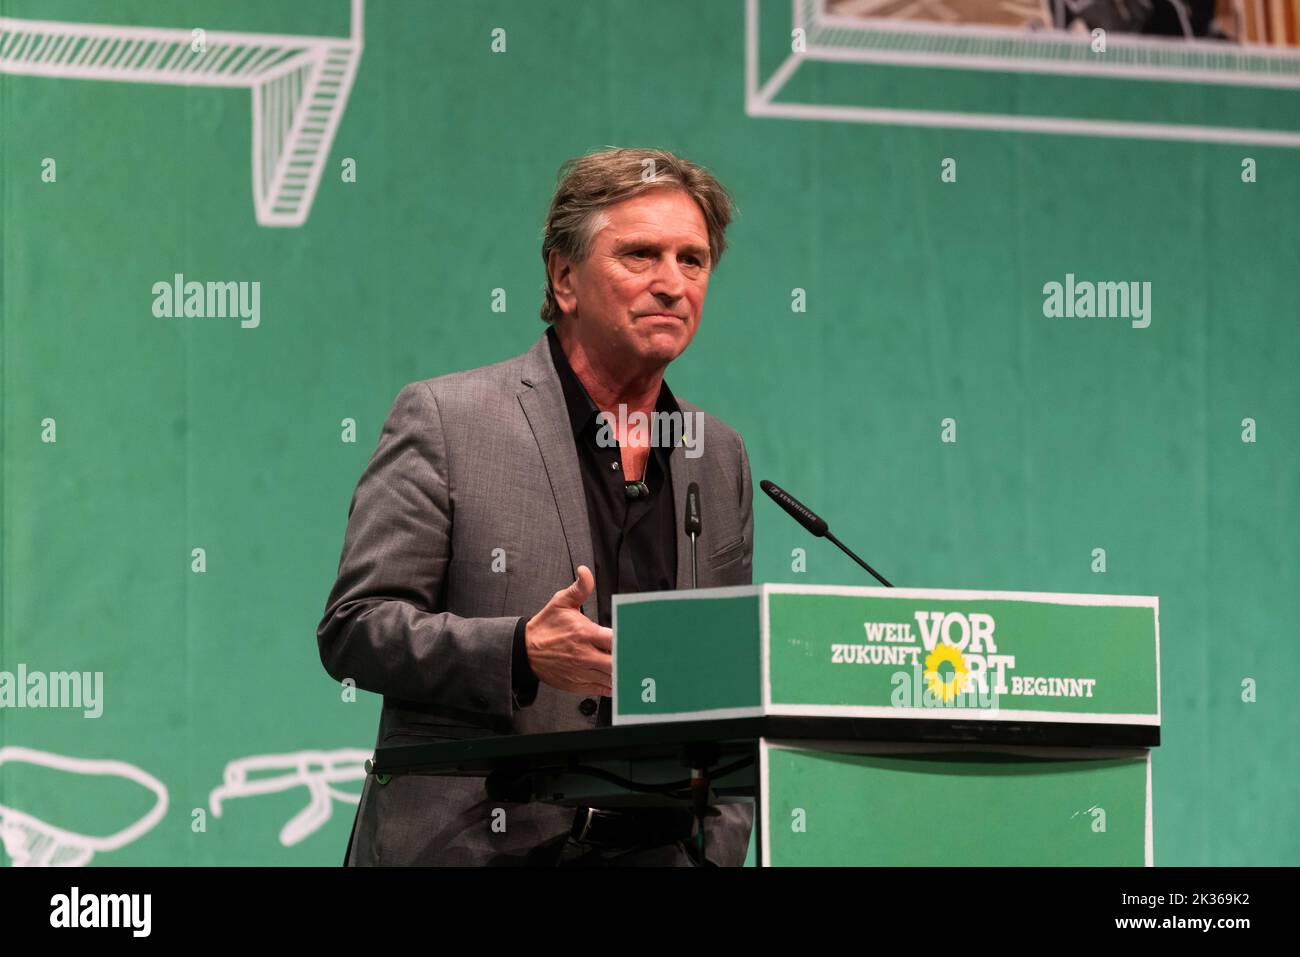 24 September 2022, Baden-Wuerttemberg, Donaueschingen: Manfred 'Manne' Lucha (Bündnis 90/Die Grünen), Minister of Health of Baden-Württemberg, stands on stage and speaks during the state party conference of his party. Bündnis 90/Die Grünen in Baden-Württemberg come together again in presence after several online party conferences. In Donaueschingen, they want to distinguish themselves as a party of rural areas. There could be disputes about budgetary policy. Alliance 90/The Greens in Baden-Württemberg are coming together again in presence after several online party conferences. In Donaue Stock Photo